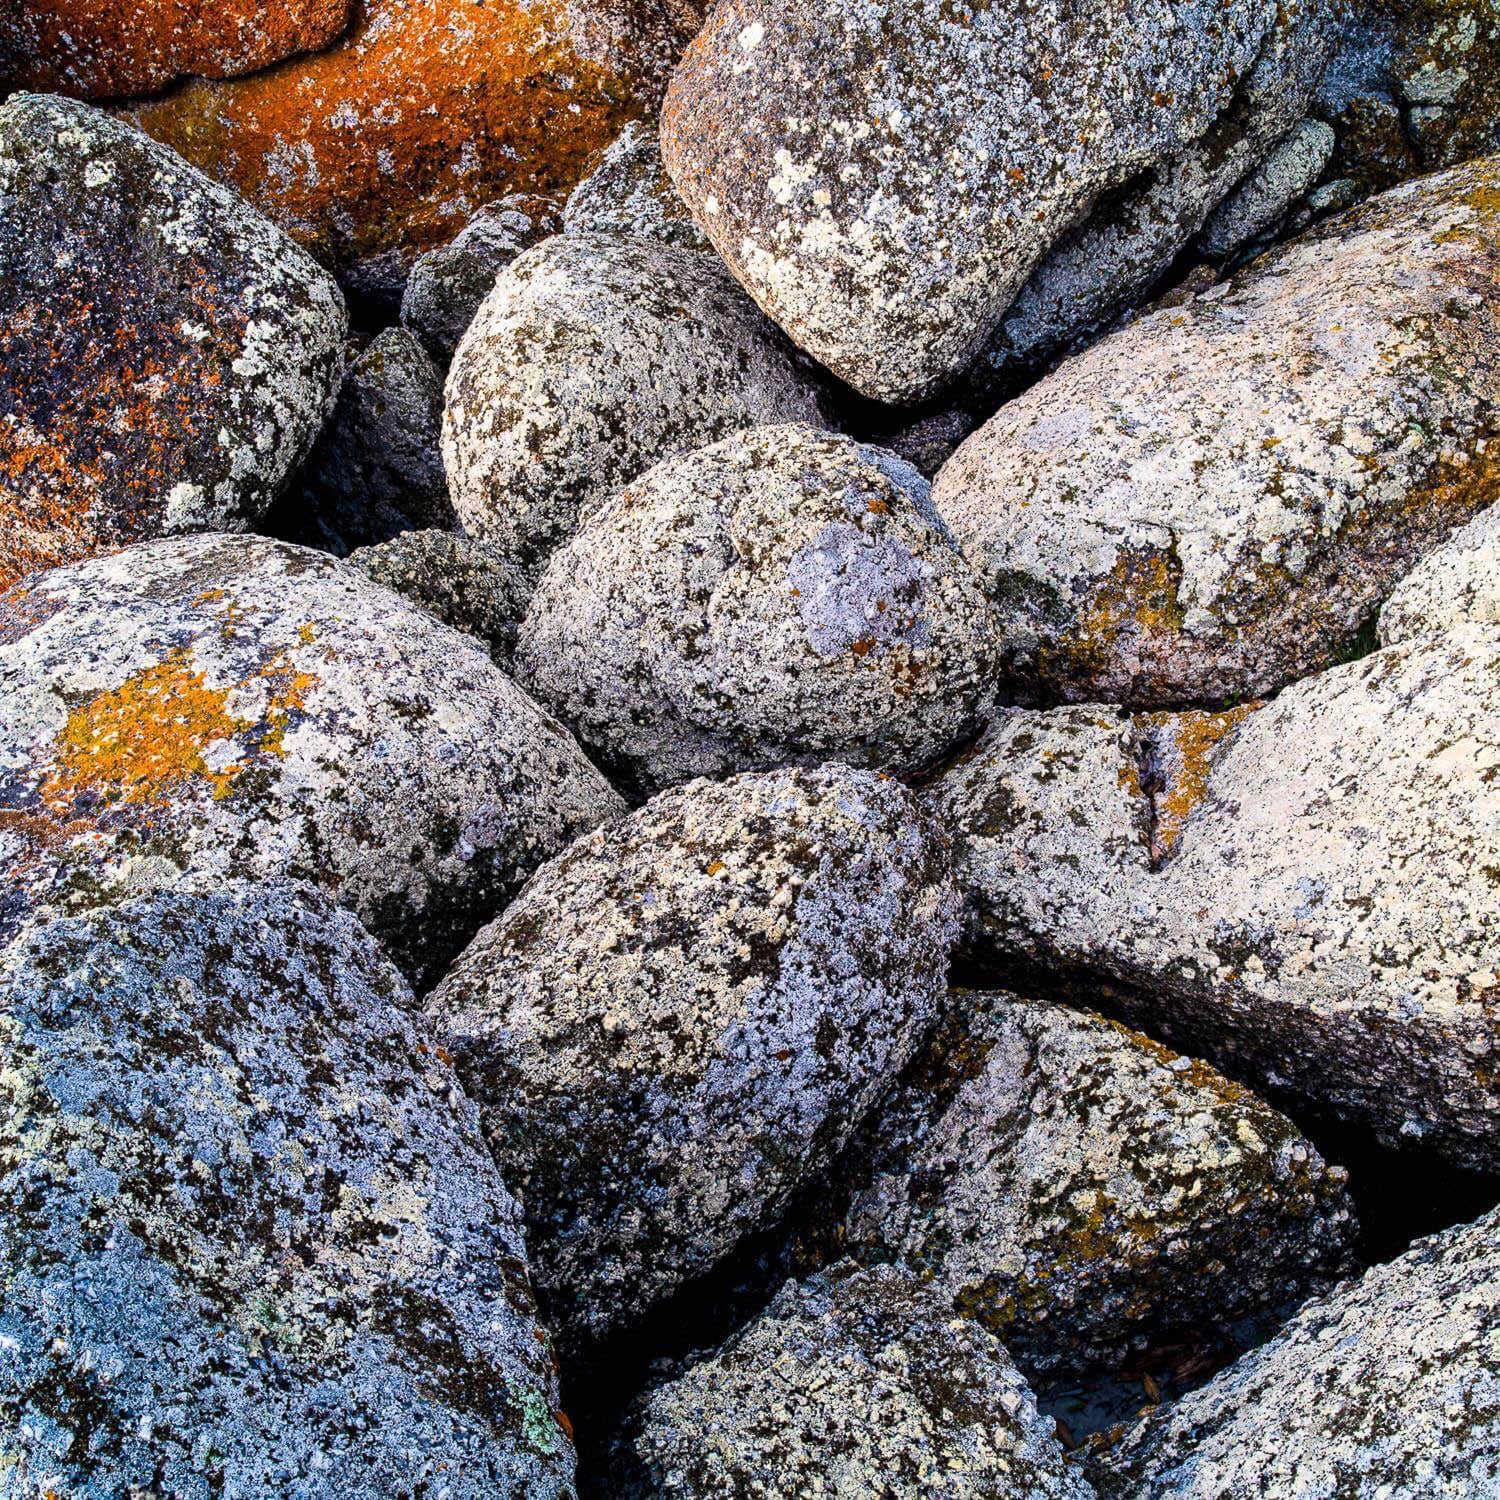 Group of rocky stones with white lichen over them, White Lichen on rock, Bay of Fires